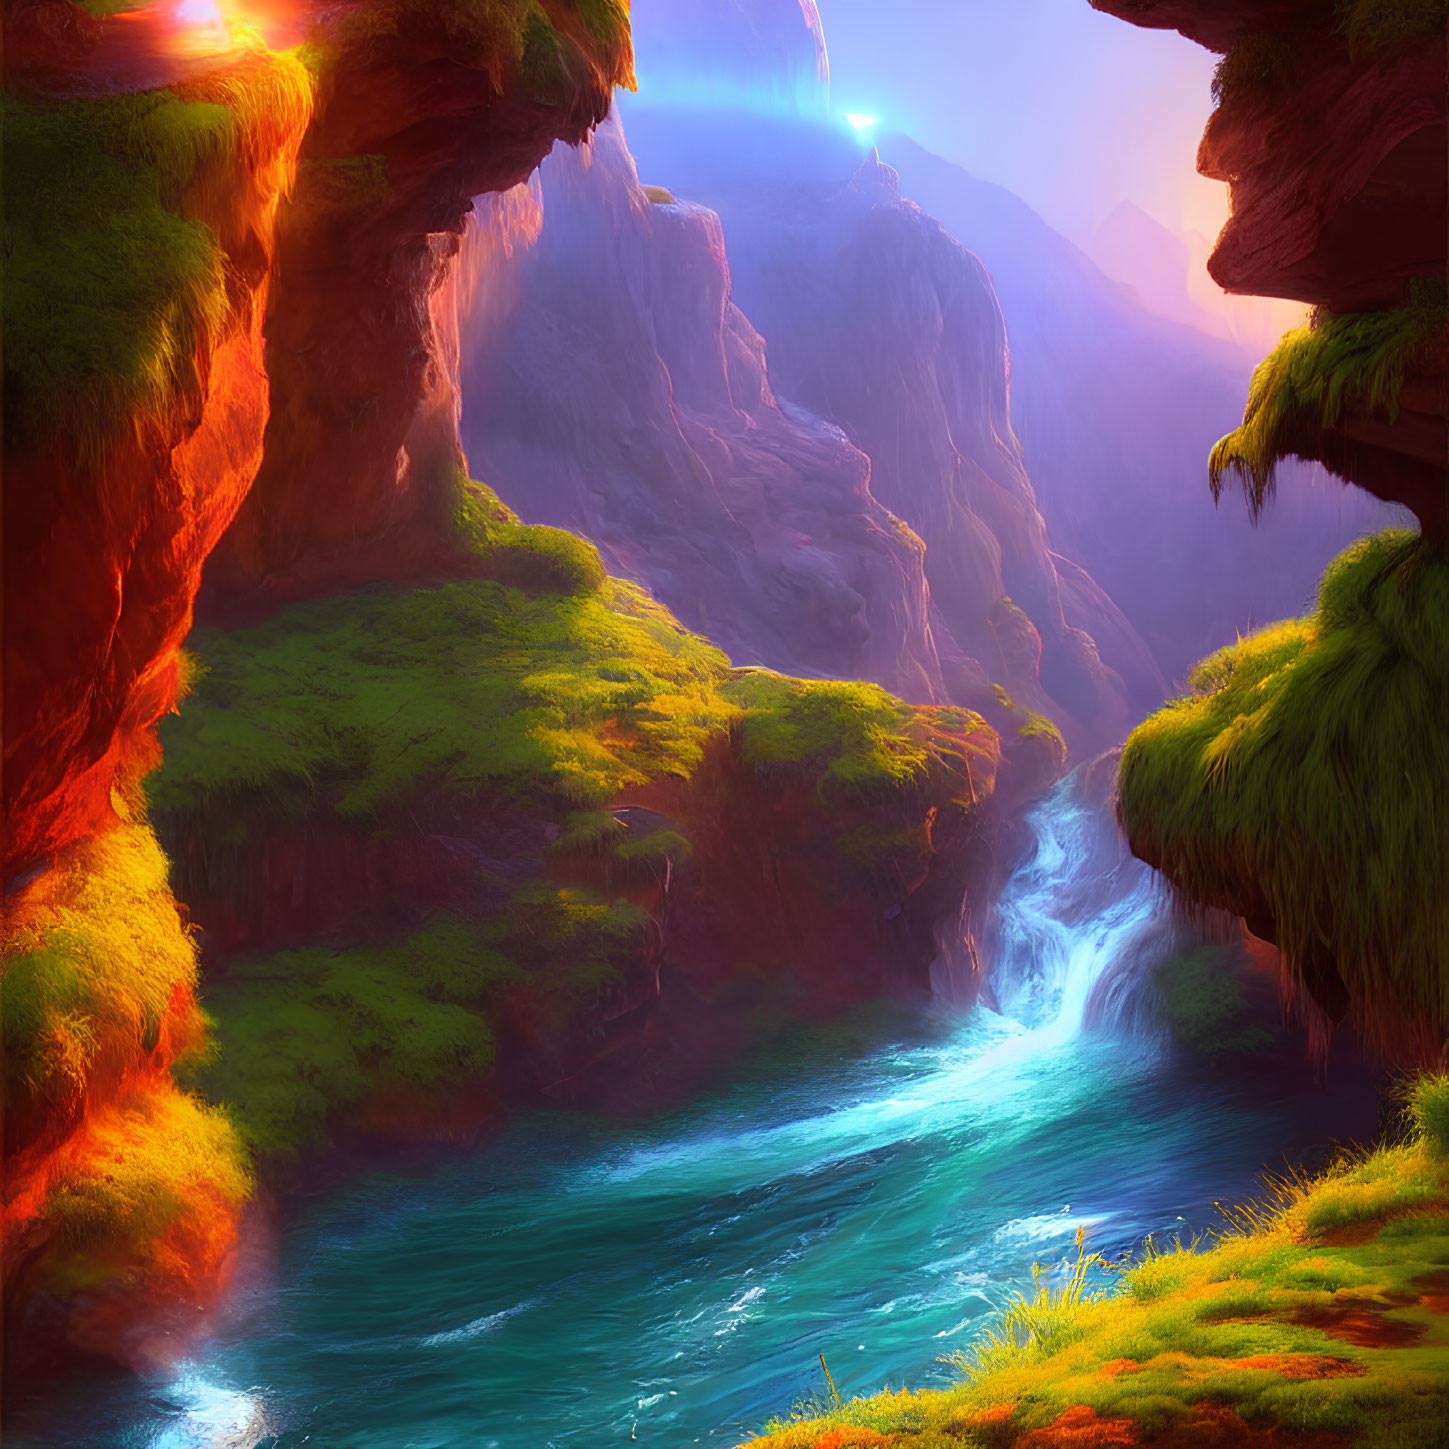 Lush River Canyon Landscape with Sunlight and Rock Formations